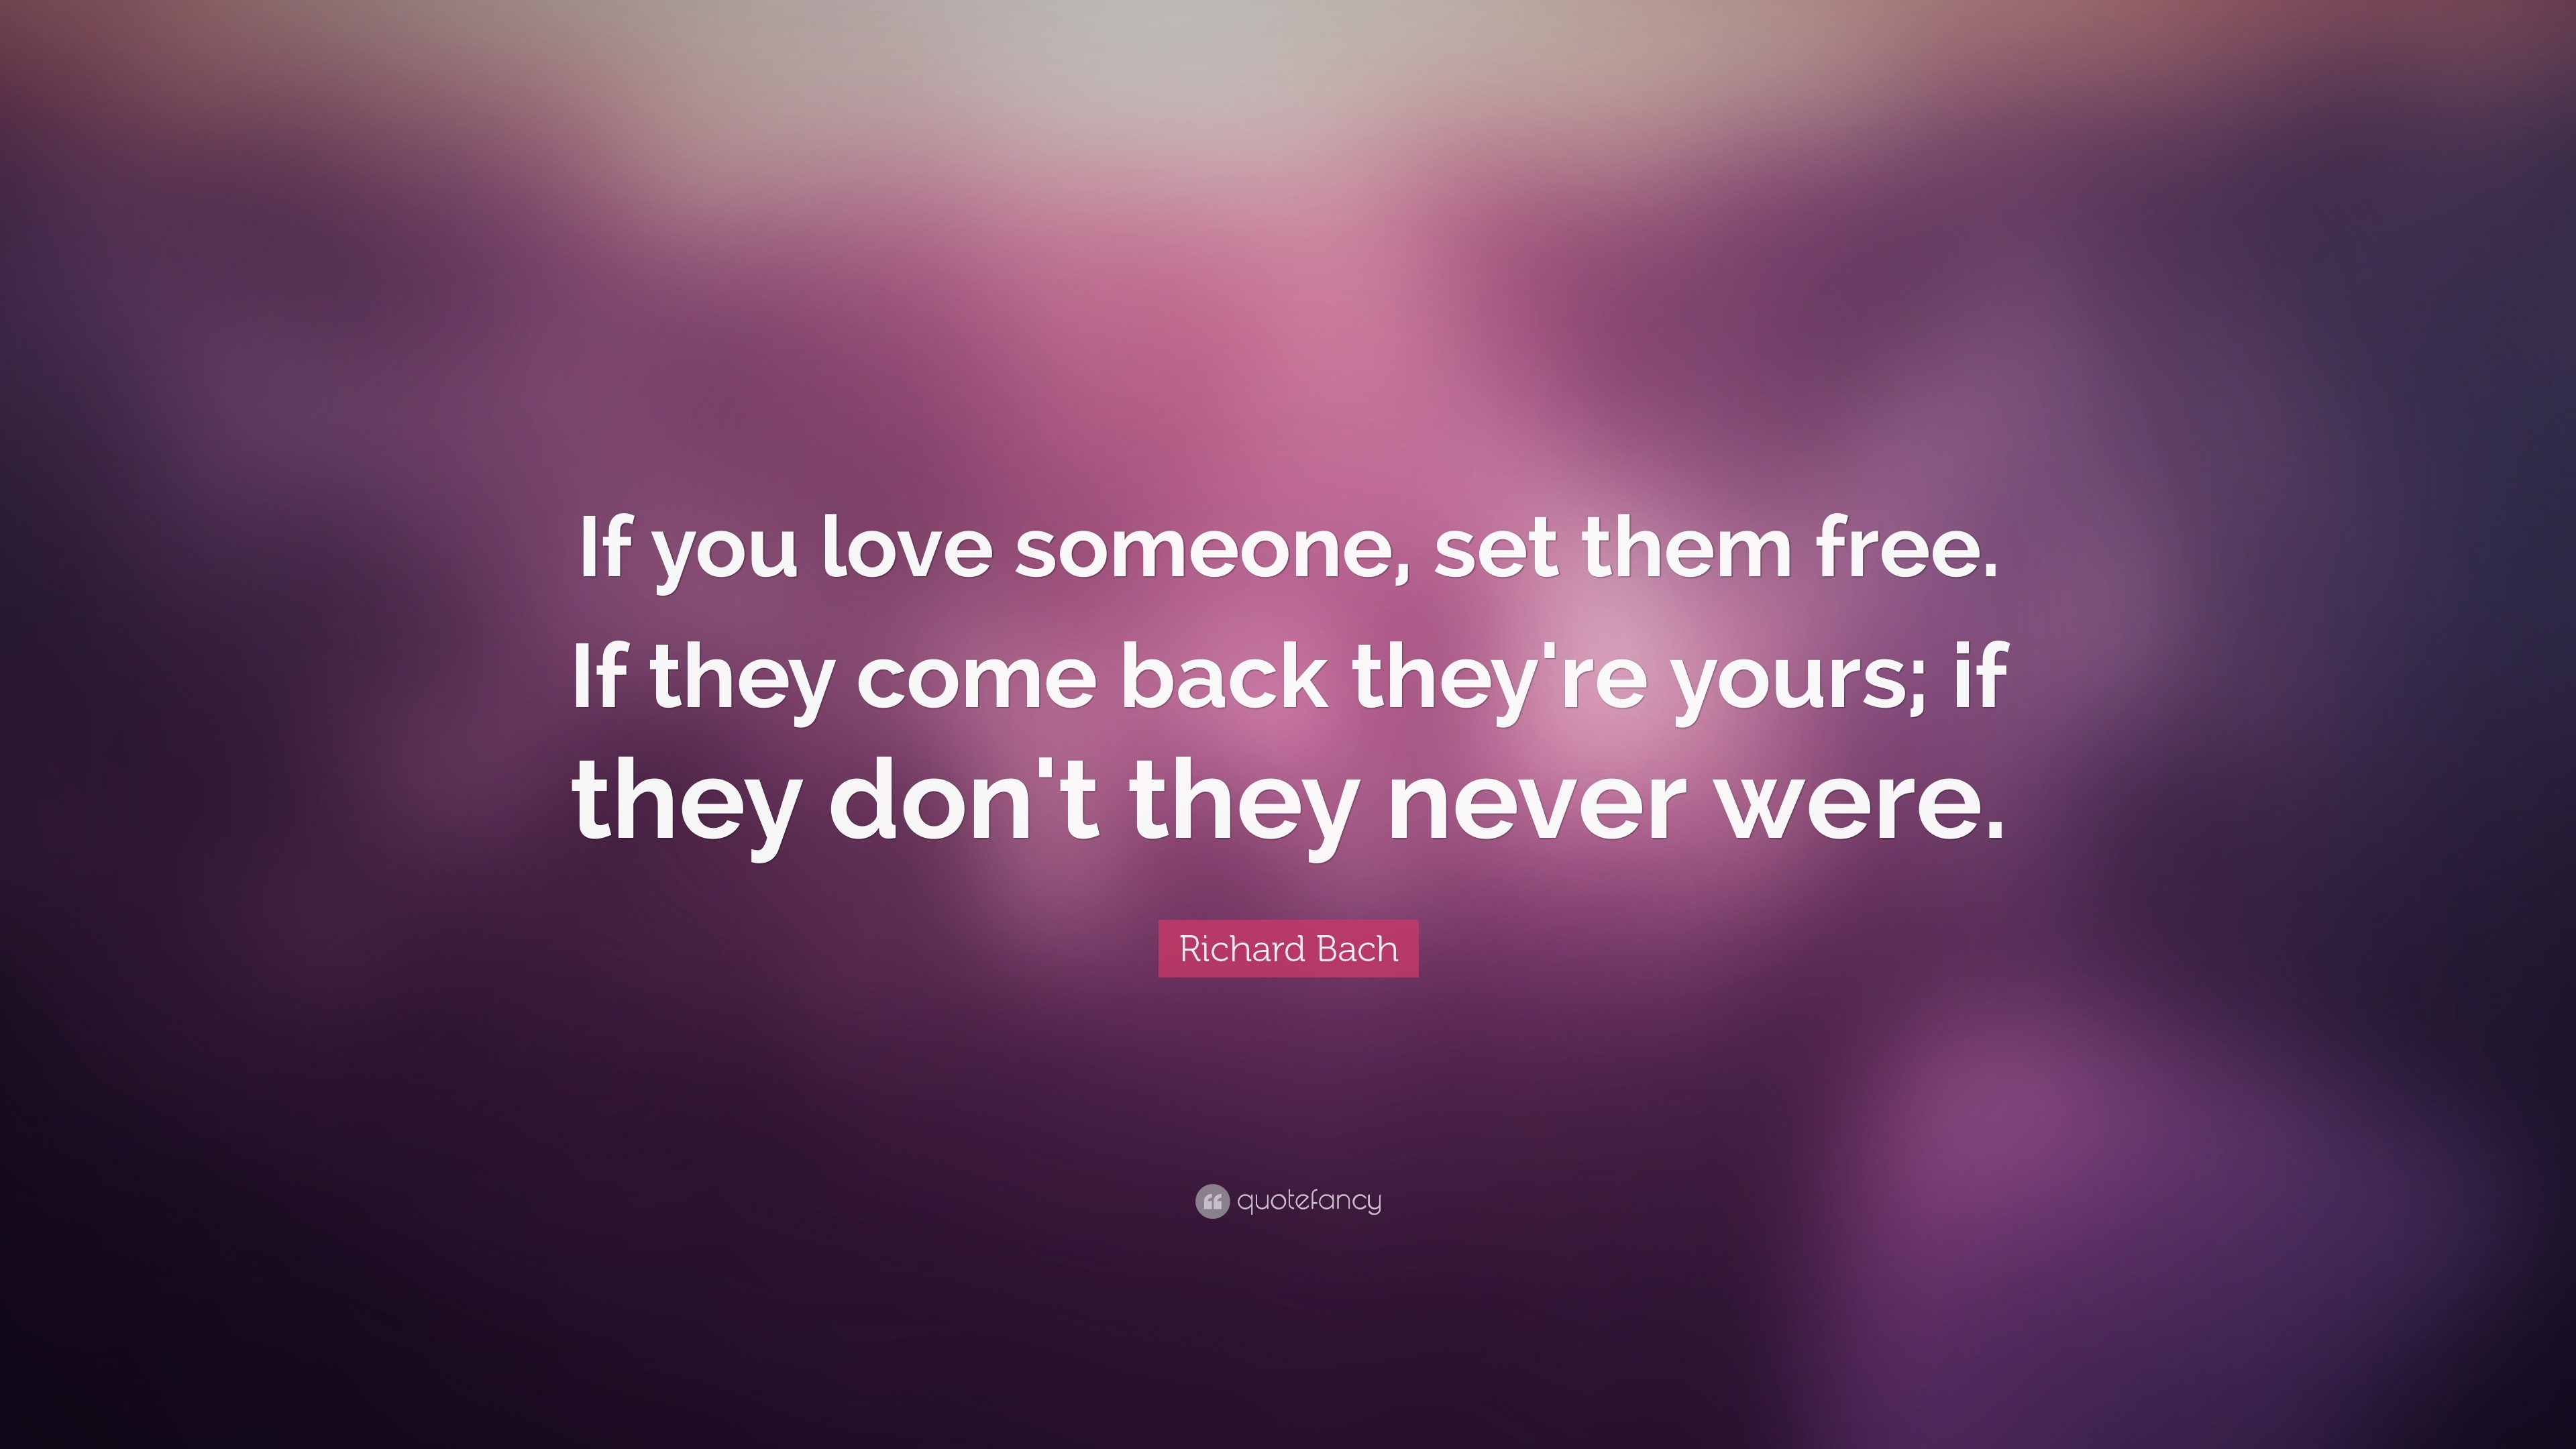 Richard Bach Quote “If you love someone set them free If they